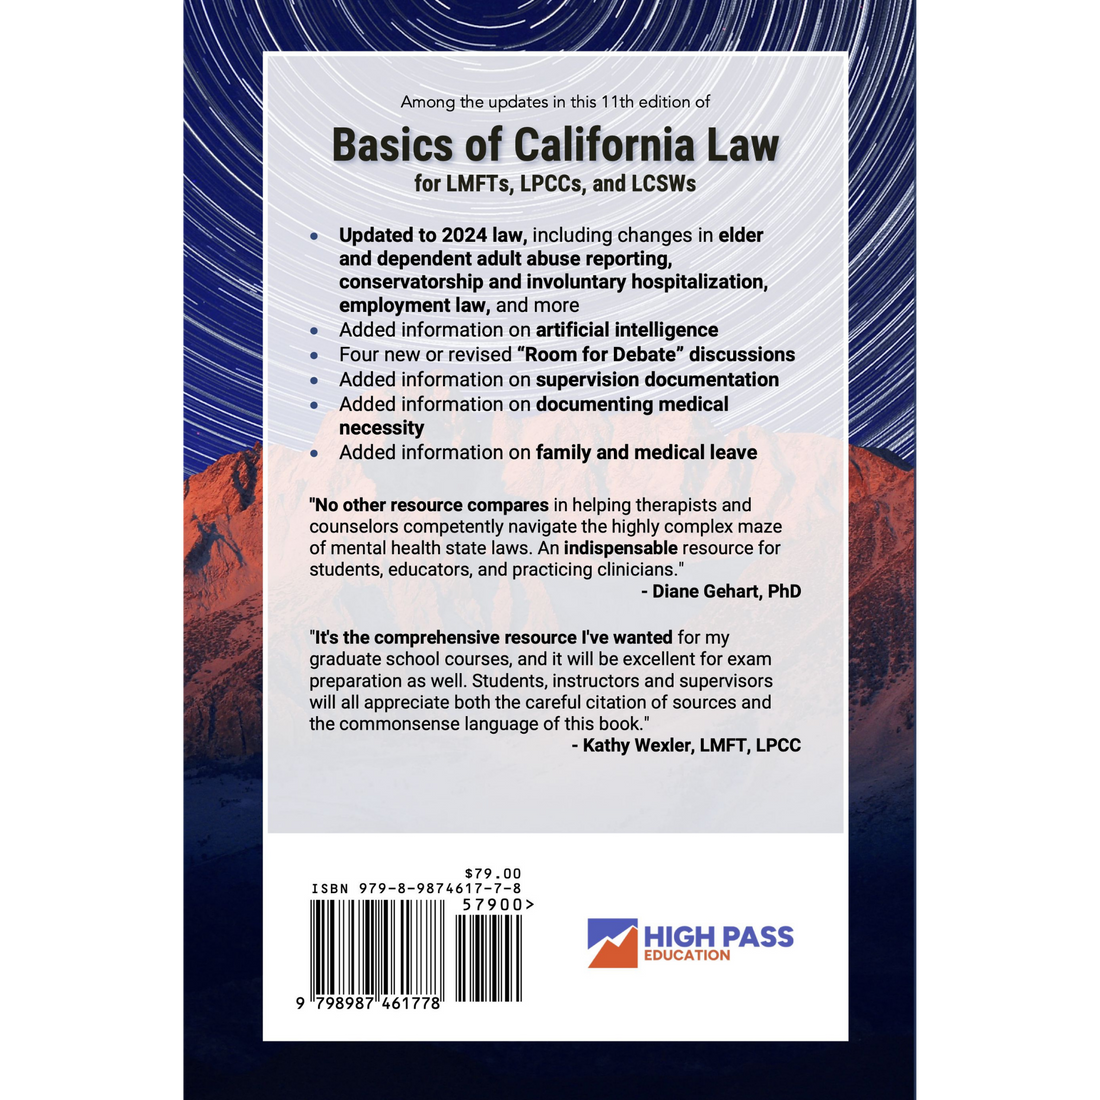 Basics of California Law for LMFTs, LPCCs, and LCSWs, 11th ed - paperback version